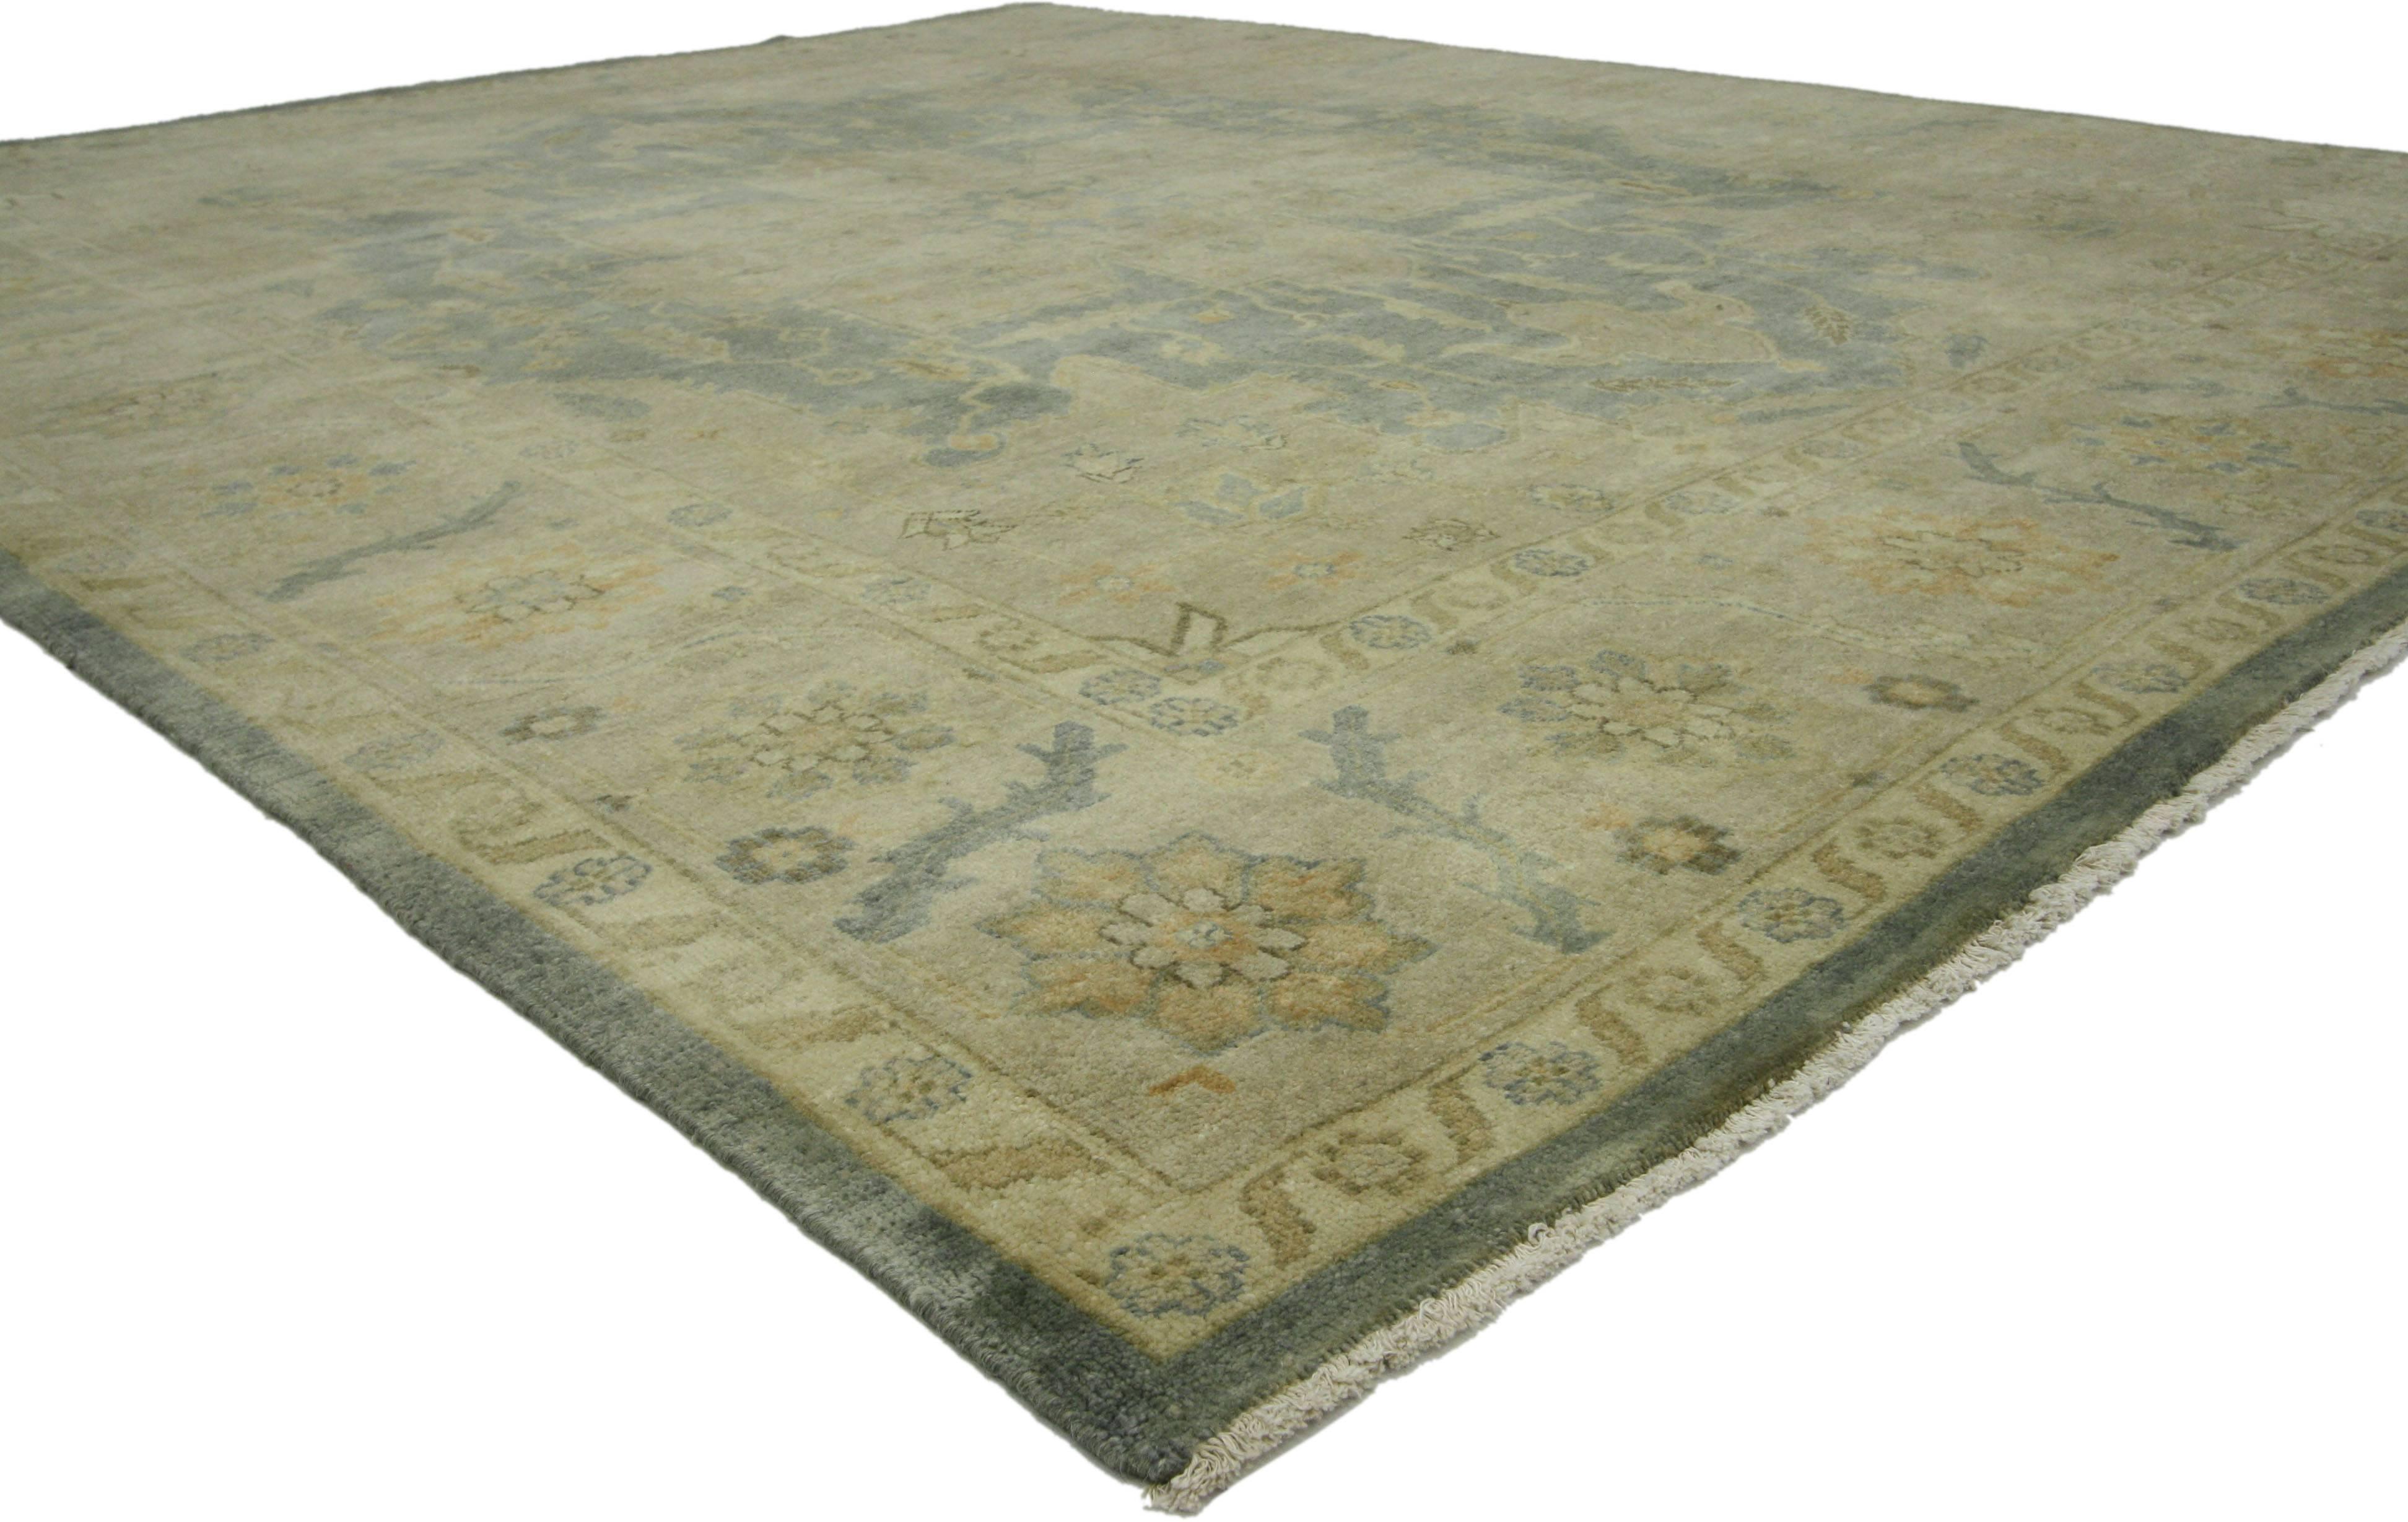 30177, contemporary Heriz style rug with neutral colors. This hand knotted wool contemporary Heriz-style rug features a large octofoil medallion with anchor pendants centered on an abrashed field. Delicate vinery, lanceolate leaves, rosettes, buds